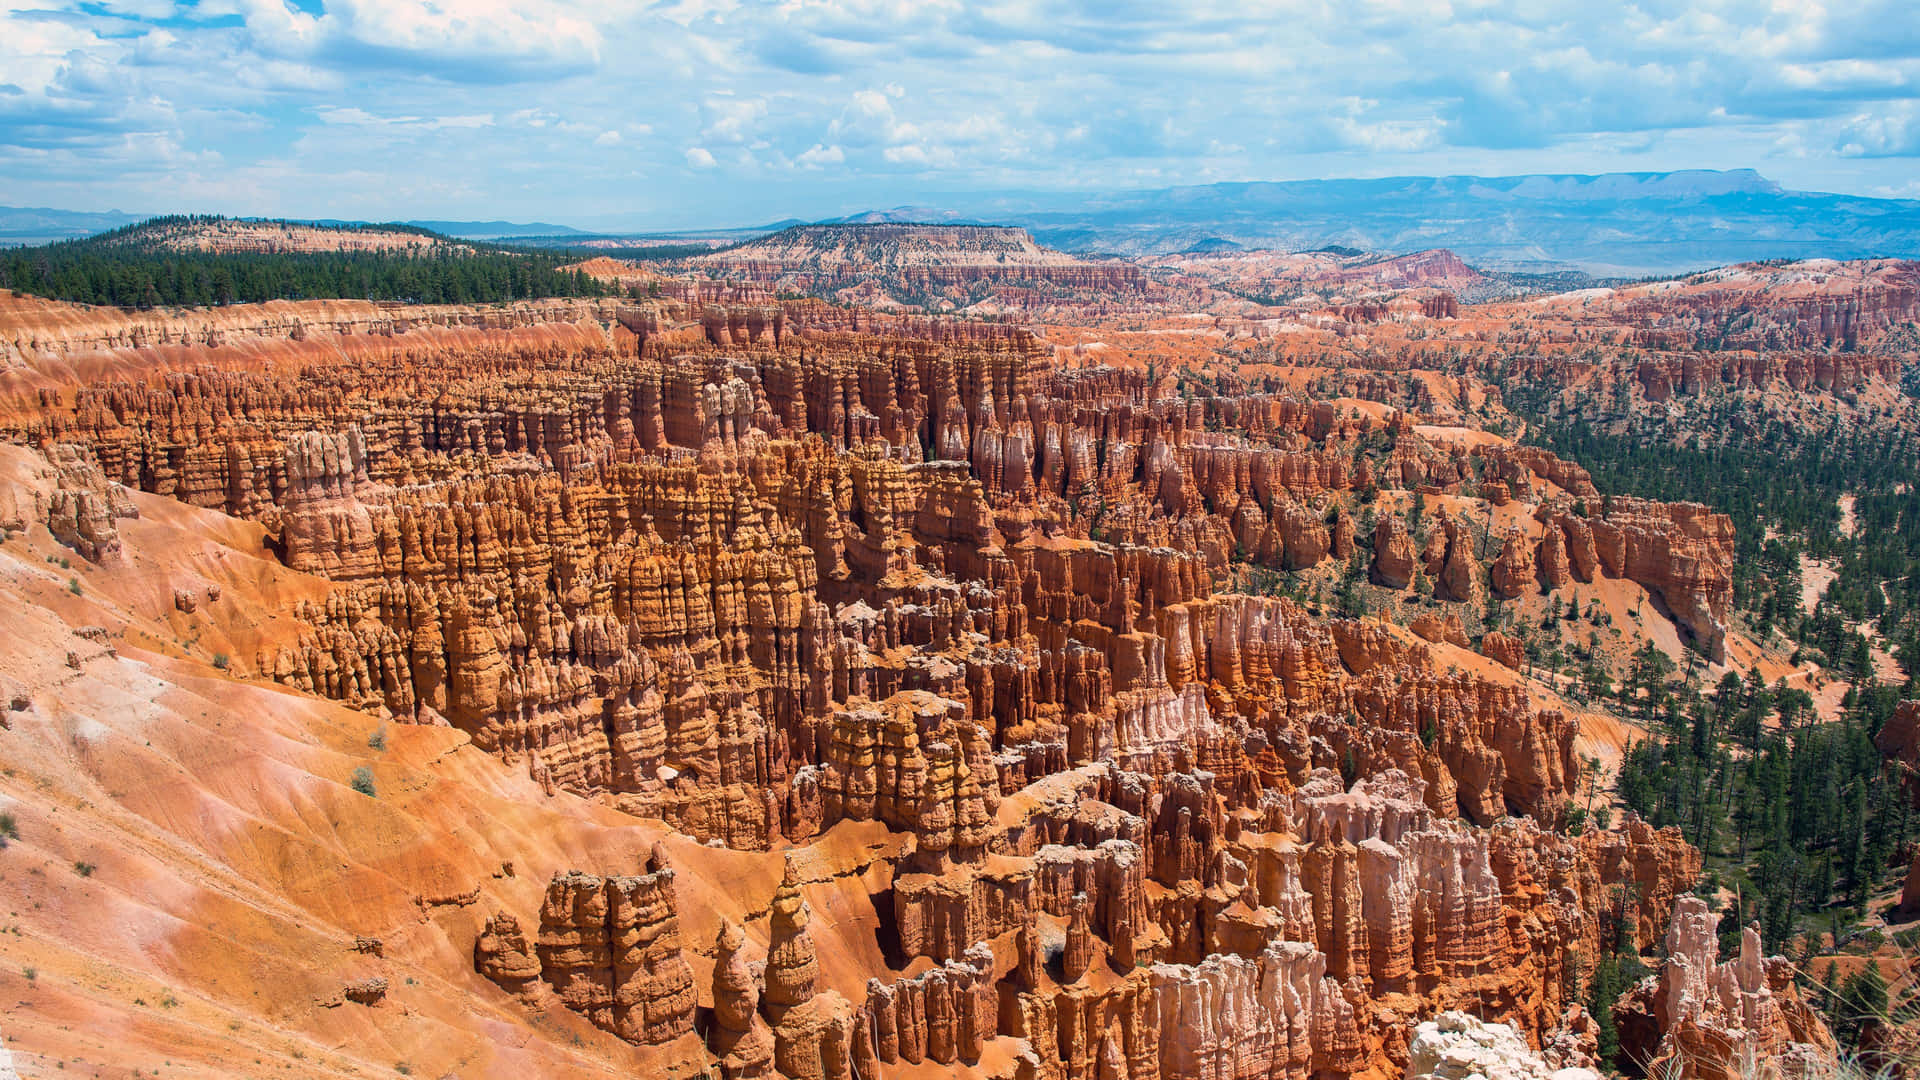 Caption: Majestic View of Bryce Canyon National Park's Main Amphitheater Wallpaper